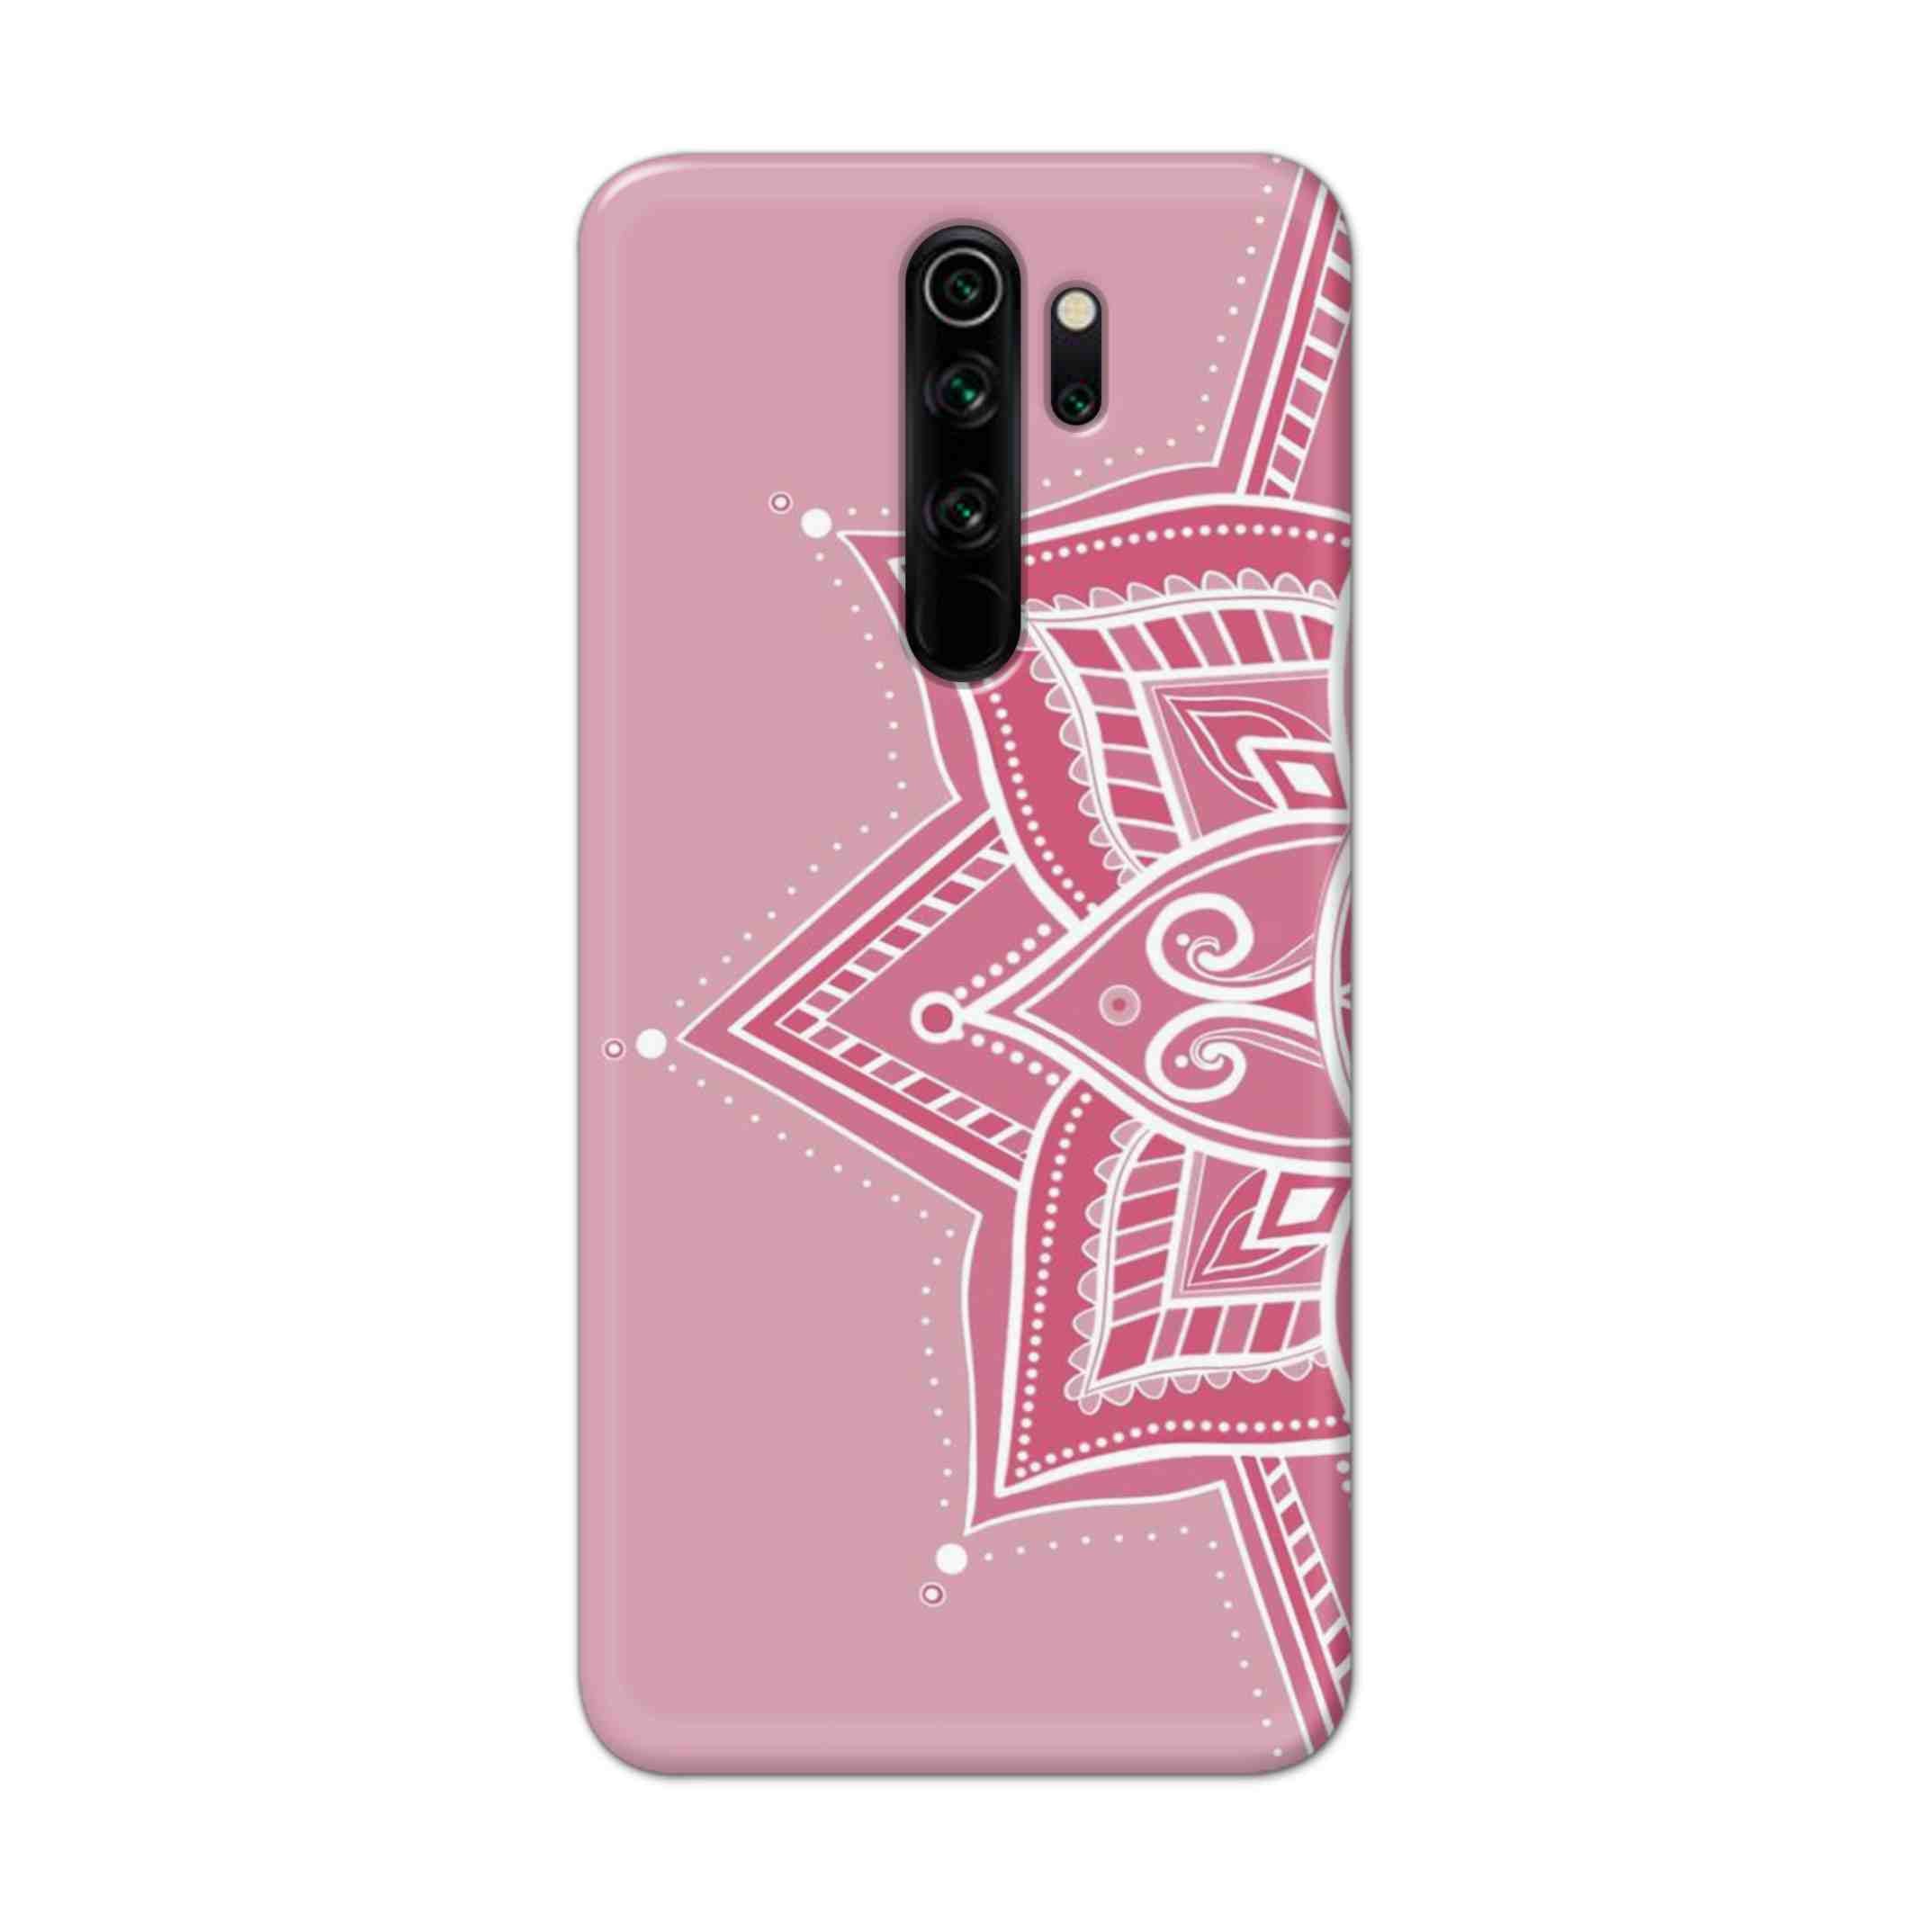 Buy Pink Rangoli Hard Back Mobile Phone Case Cover For Xiaomi Redmi Note 8 Pro Online